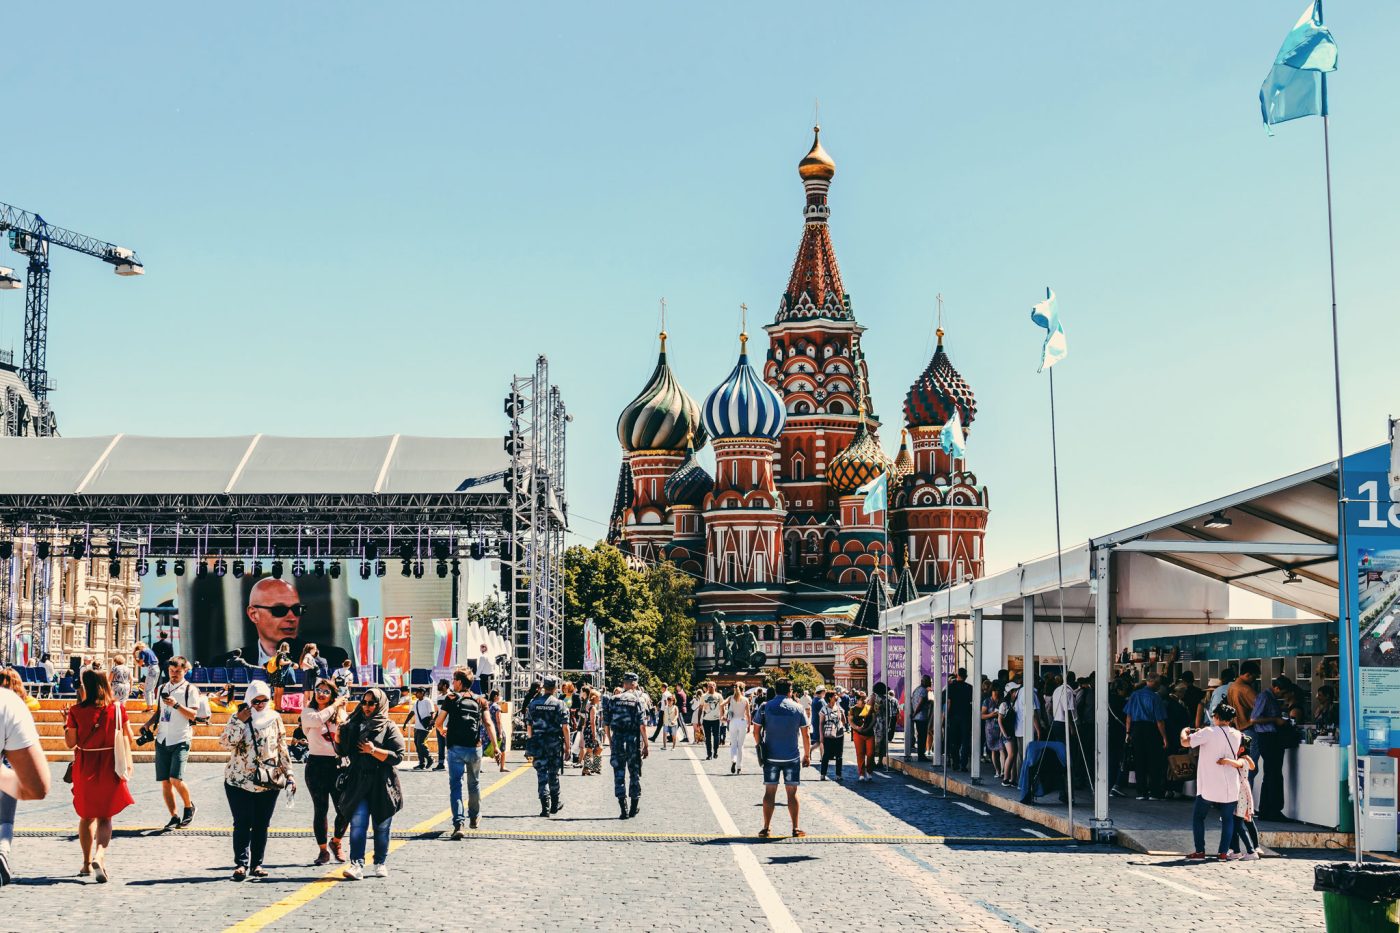 Photo: "People walking near St. Basil's Cathedral in Moscow" by Artem Beliaikin via Pexels. 